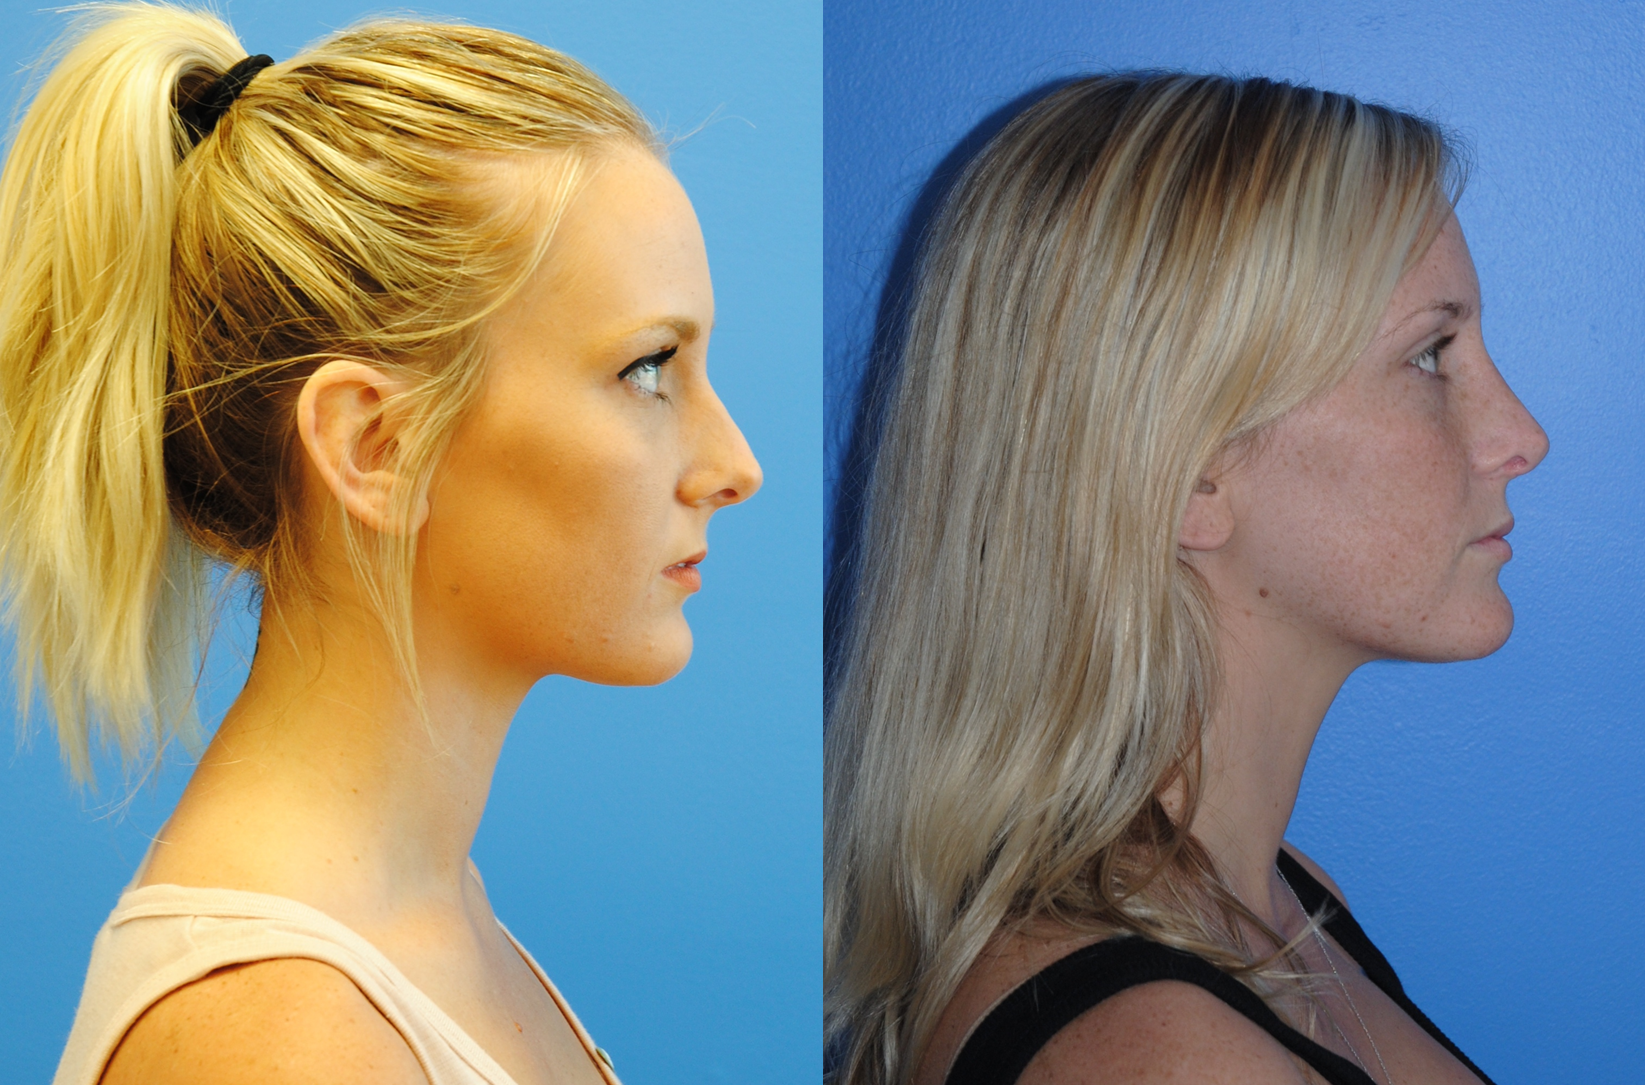 Rhinoplasty-Dorsal Hump Reduction-Natural Results